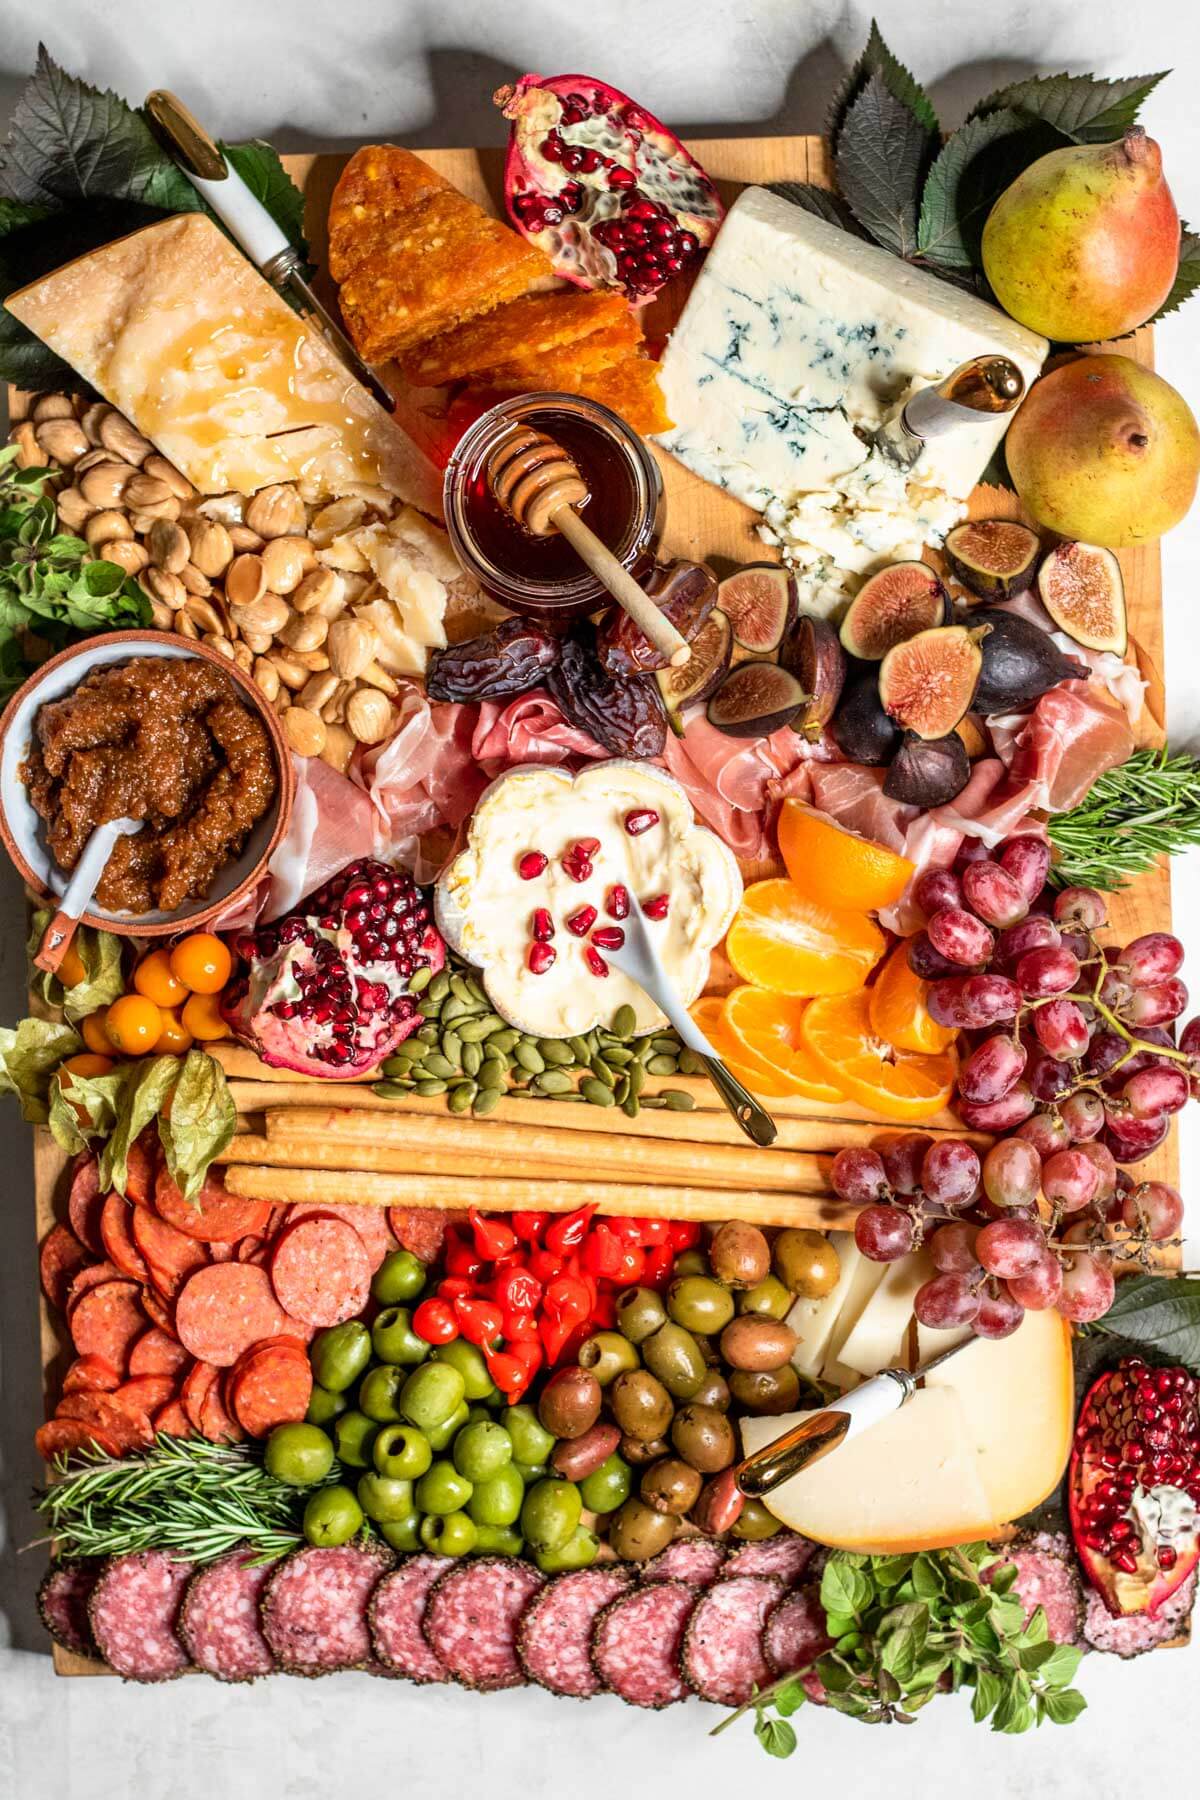 OVER THE TOP BOARD FILLED WITH CHEESE, MEATS, NUTS, AND FRUIT